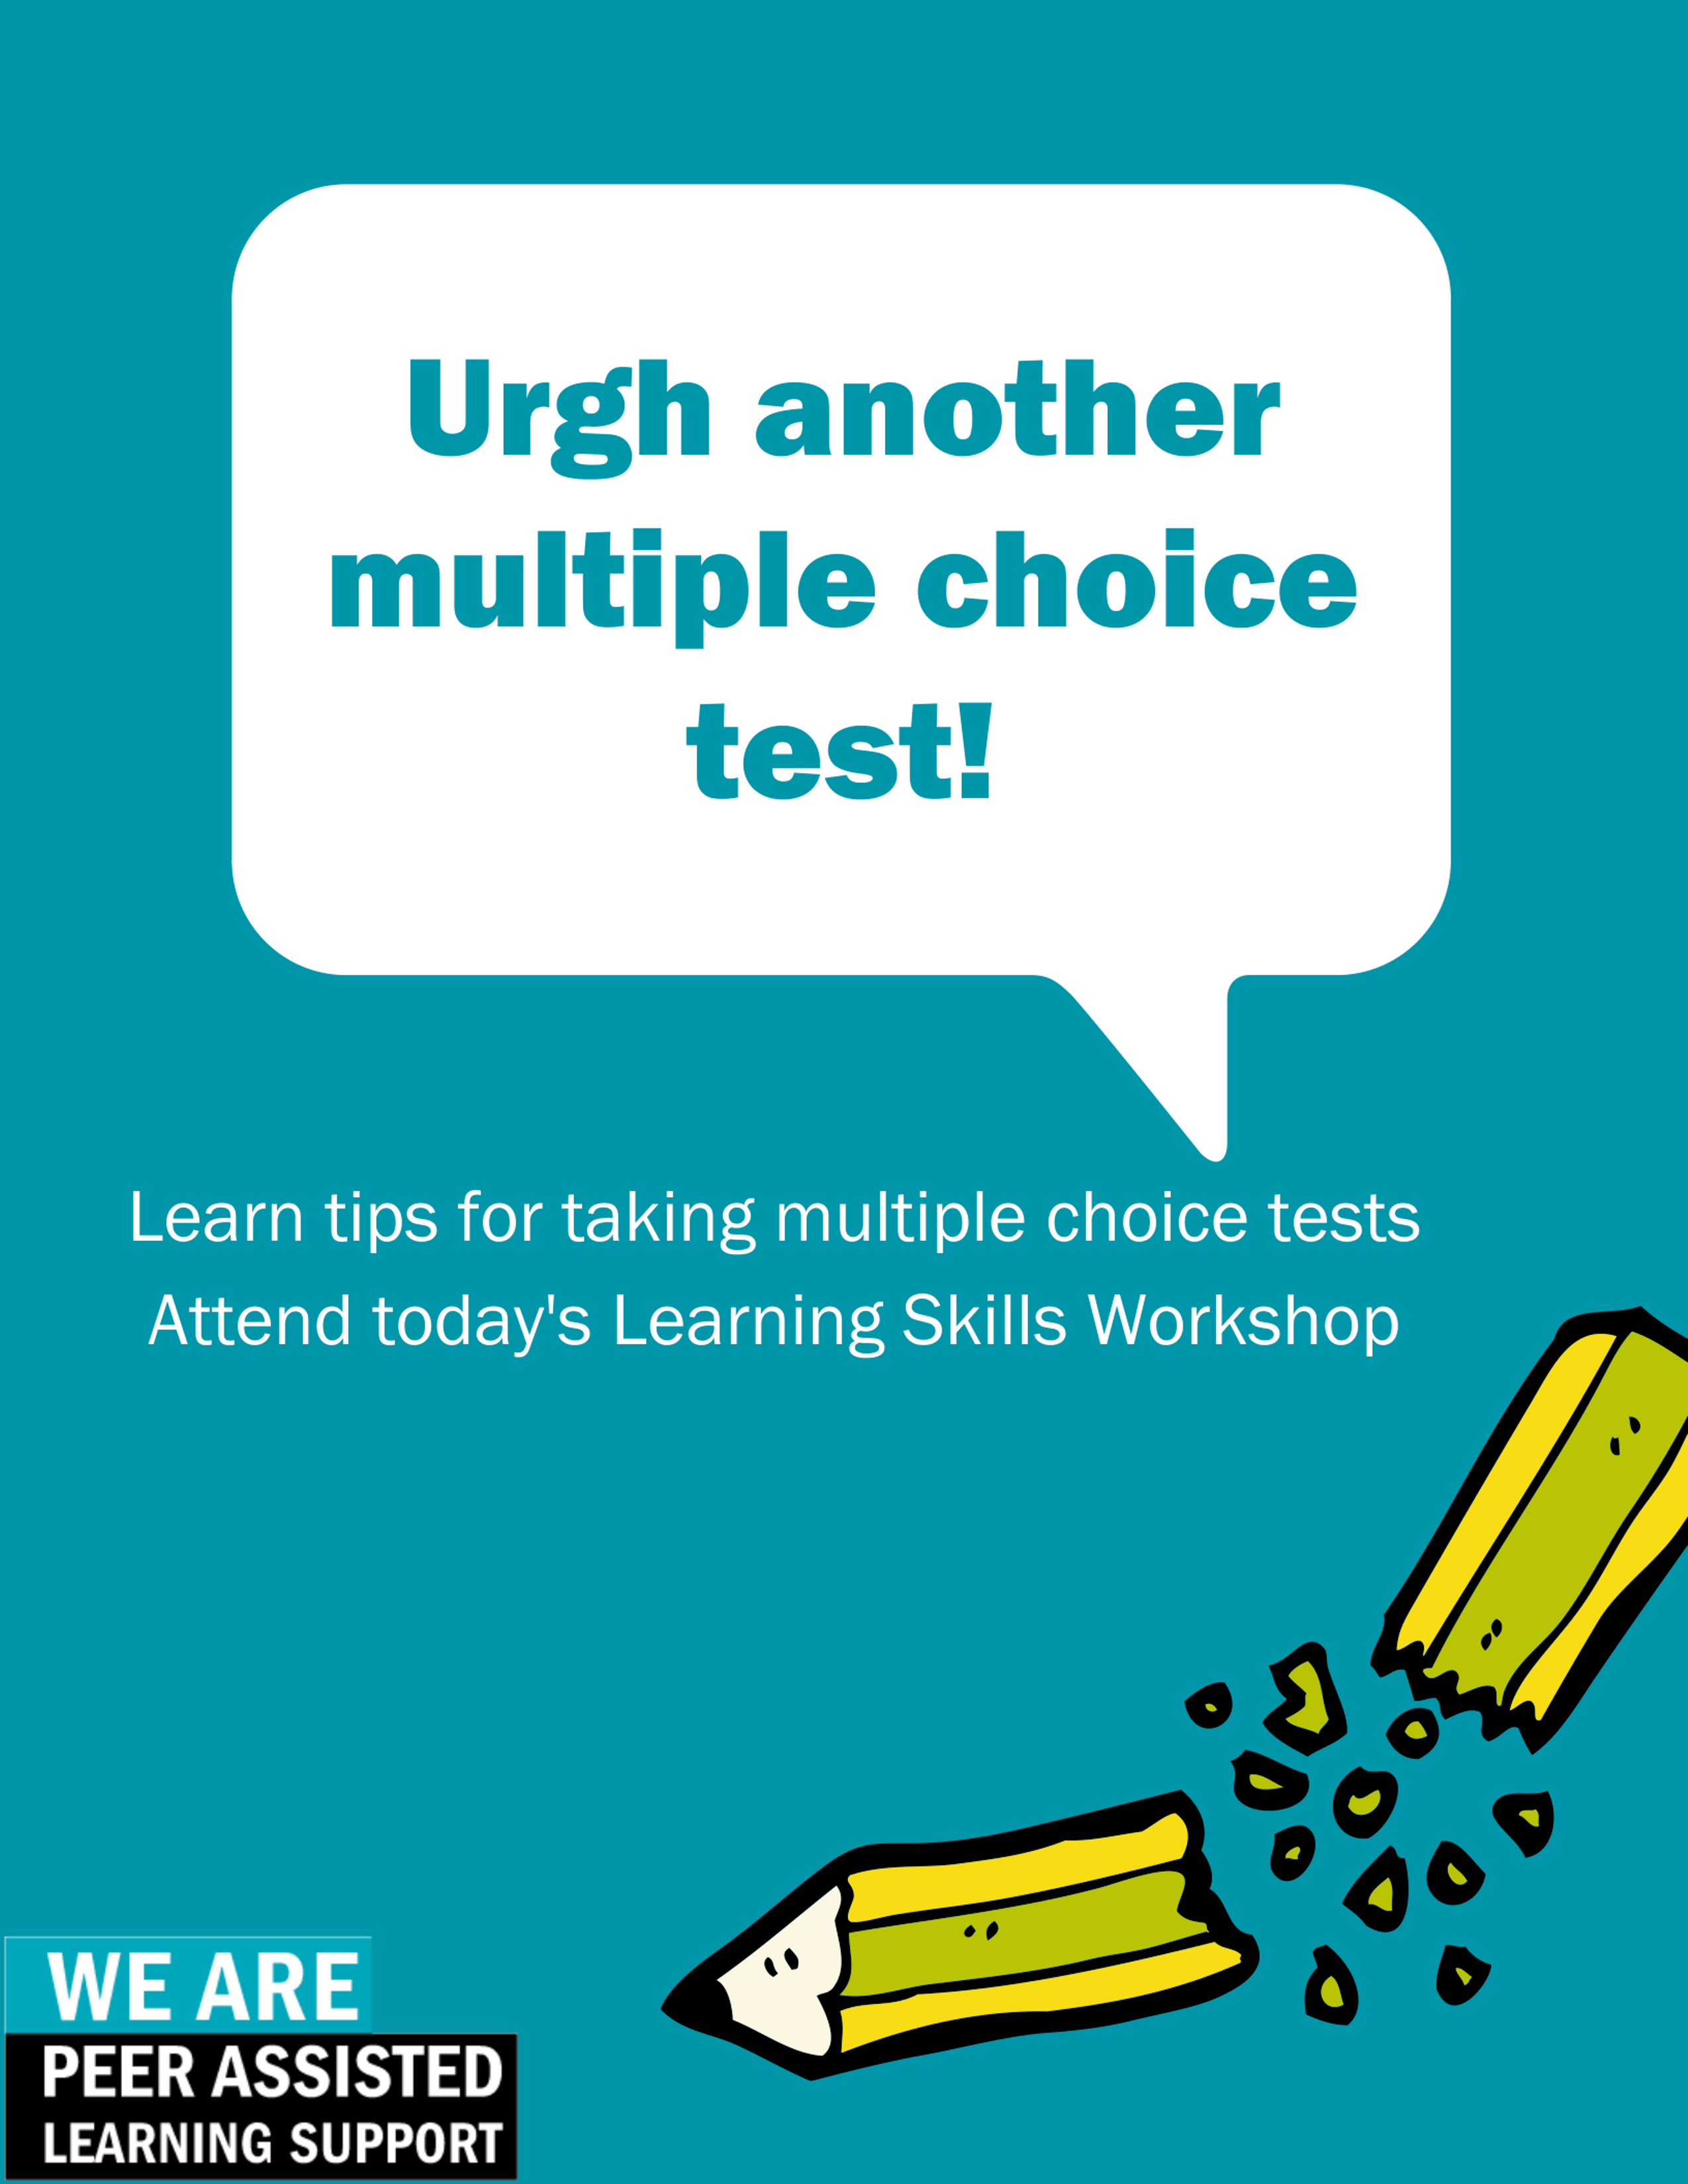 A broken pencil on a bright blue background. Background text says “Urgh another multiple choice test!  Learn tips for taking mul